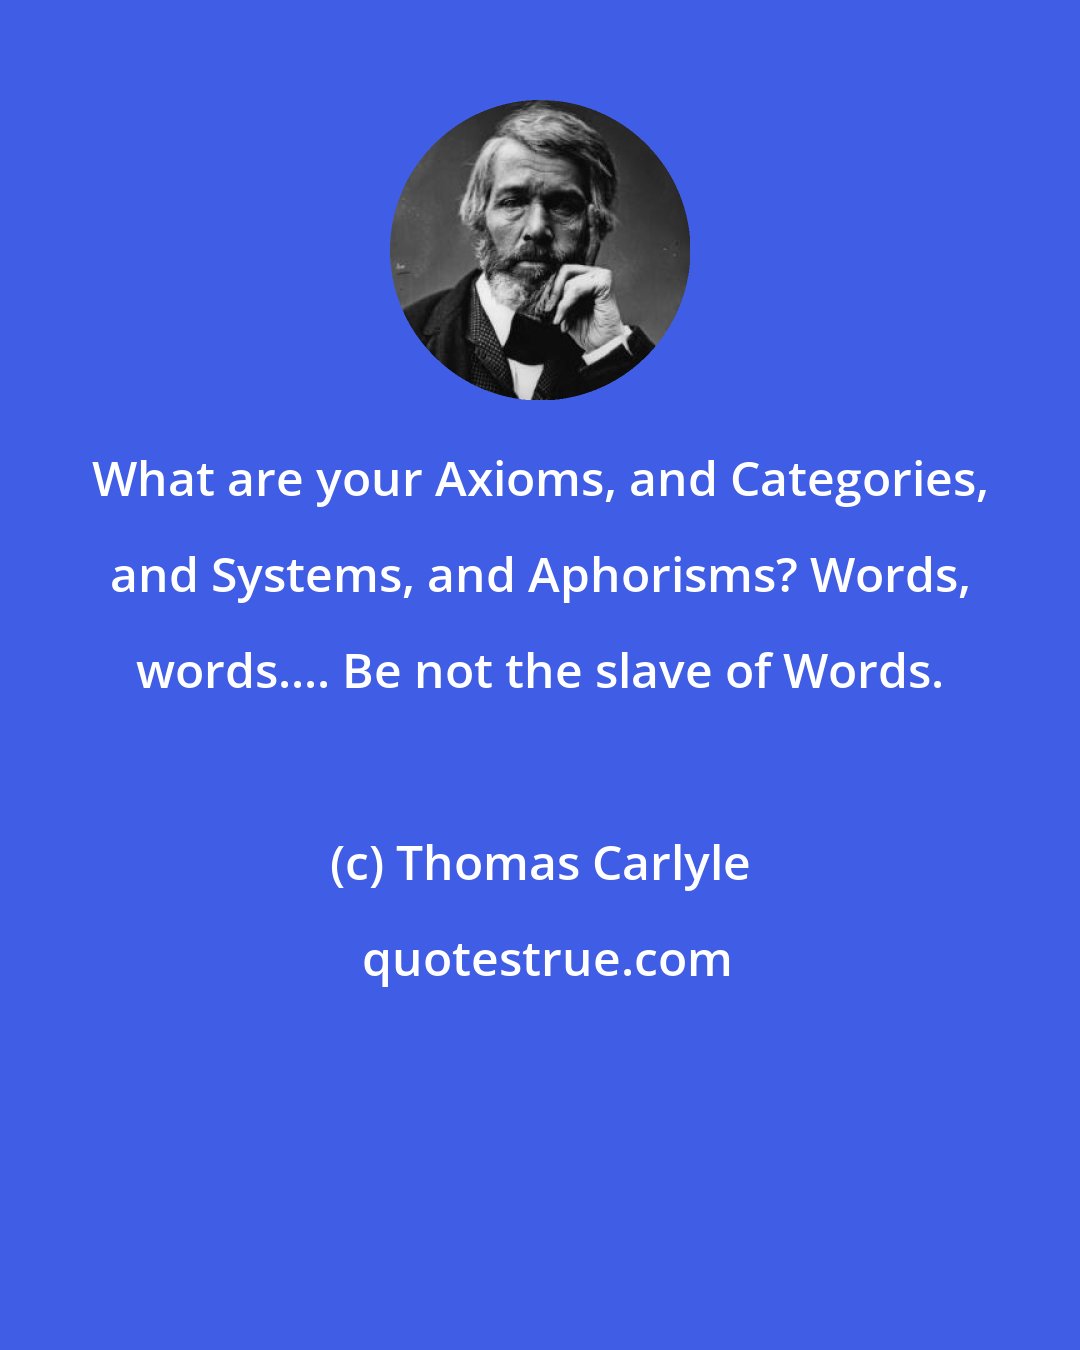 Thomas Carlyle: What are your Axioms, and Categories, and Systems, and Aphorisms? Words, words.... Be not the slave of Words.